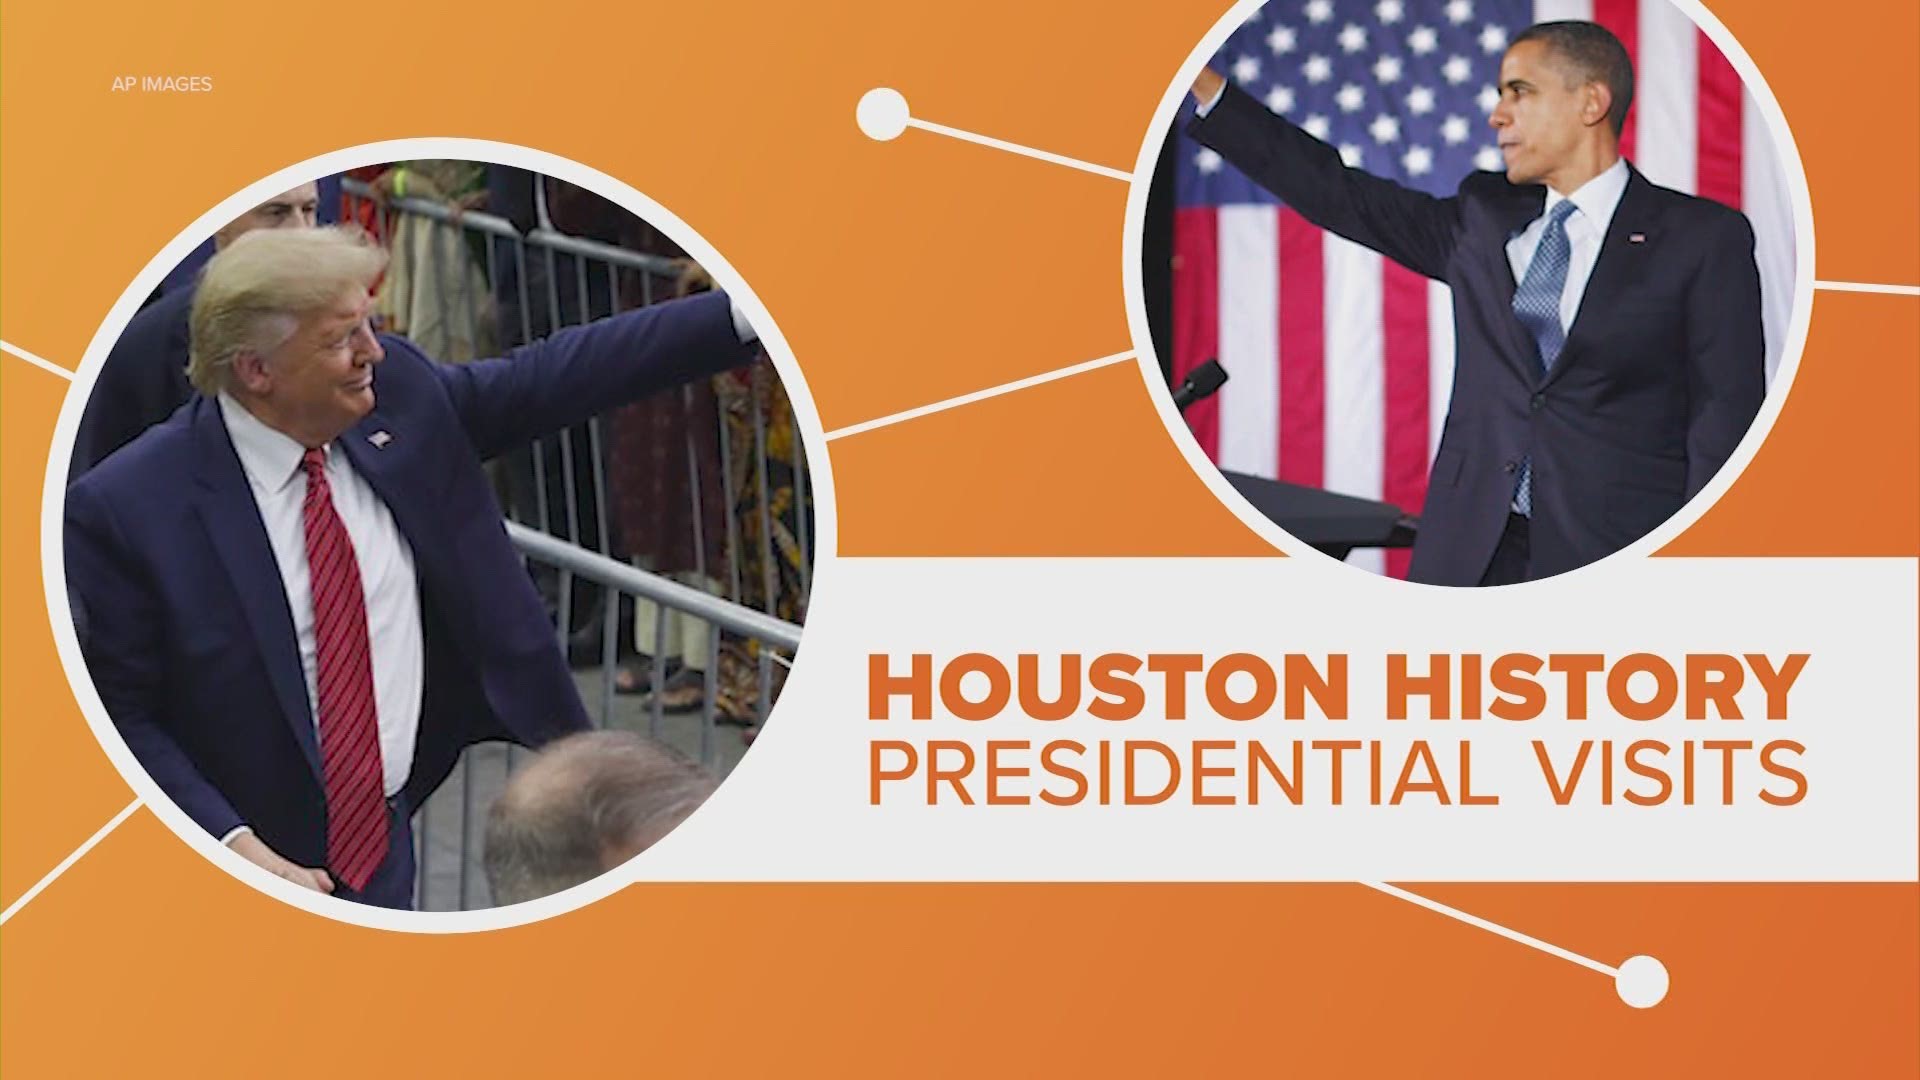 Houston is no stranger to presidential visits, but why has the leader of the free world come to the Bayou City in the past? Let’s connect the dots.